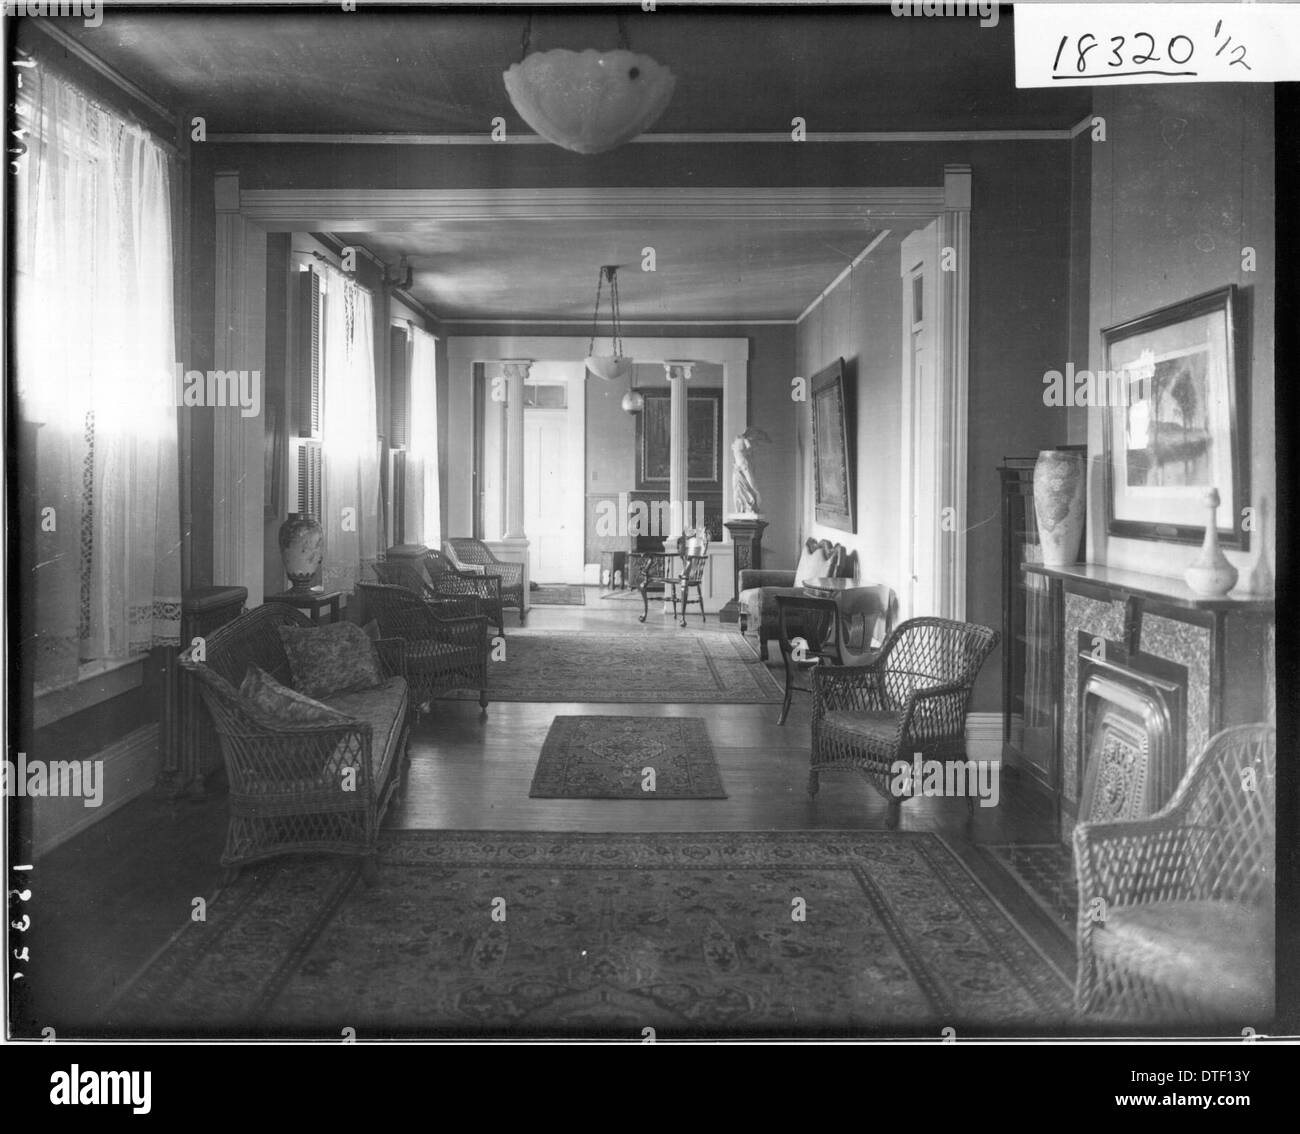 Parlor room Black and White Stock Photos & Images - Alamy